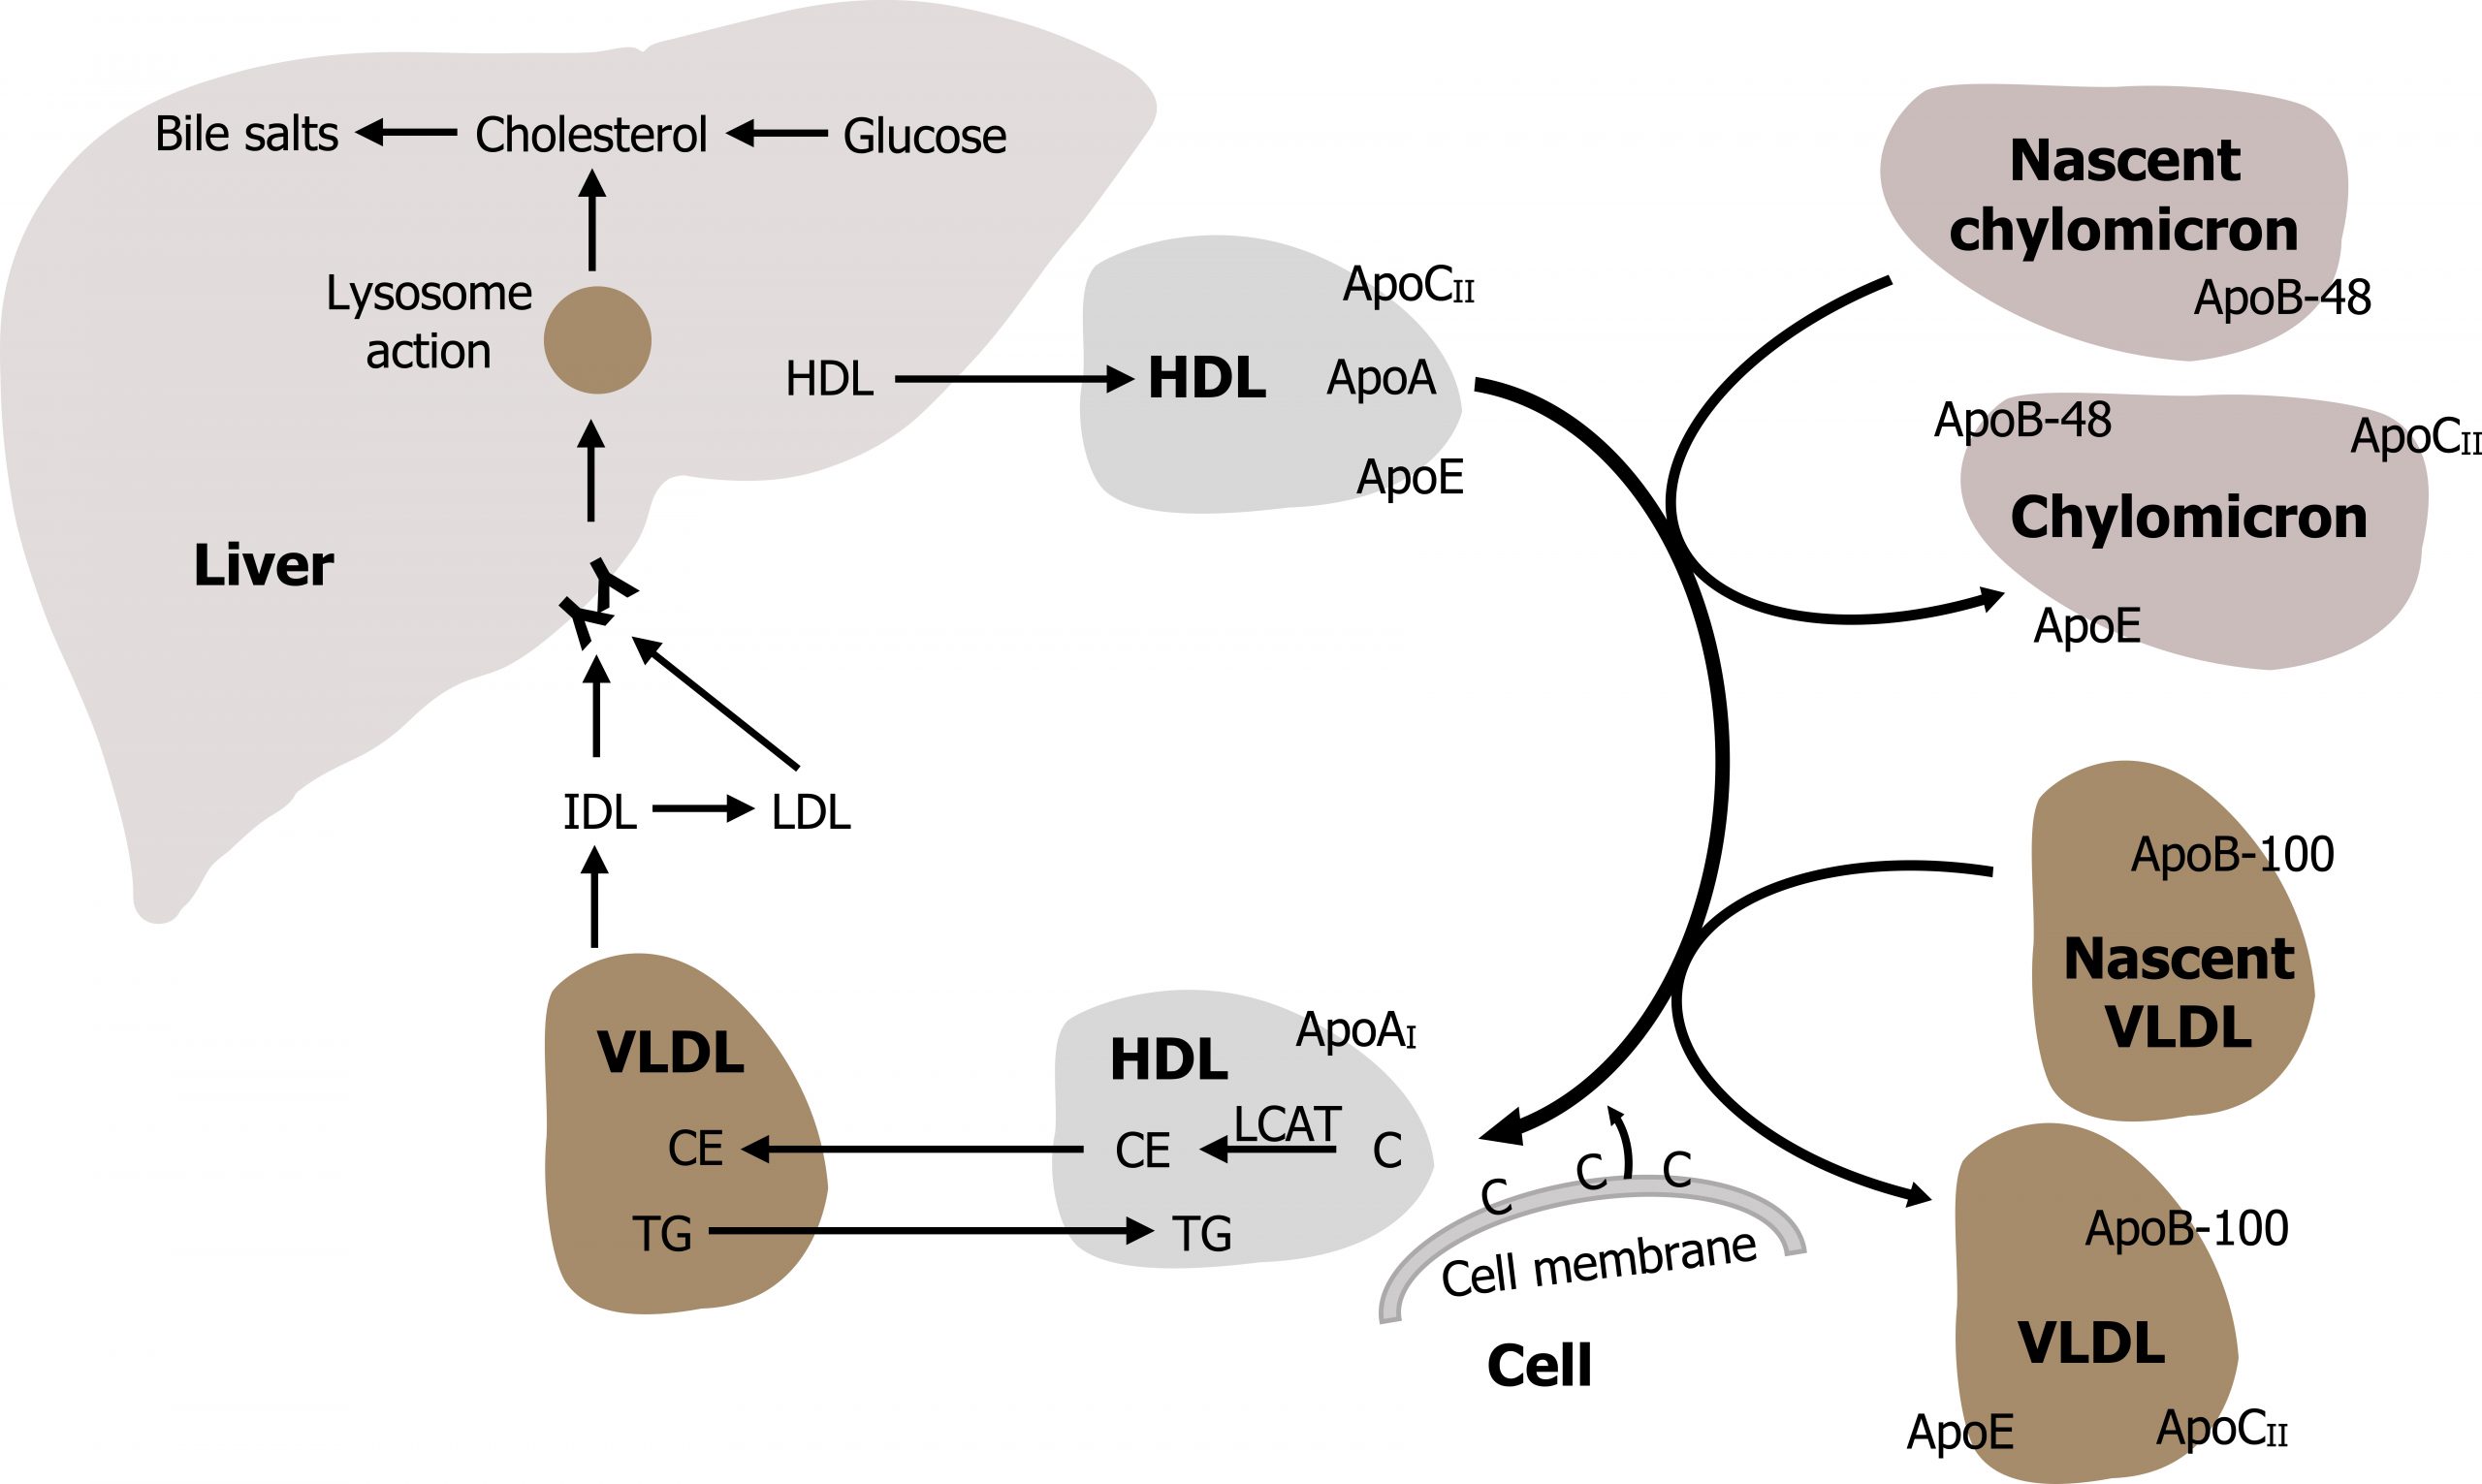 HDL in liver arrow HDL with ApoCII, ApoA, and ApoE arrow HDL with ApoAI, CE, and TG arrow VLDL with CE, and TG arrow IDL arrows to liver receptor and LDL. LDL arrow liver receptor. In the liver, lysosome action arrow cholesterol arrow bile salts. Glucose arrow cholesterol. CE from HDL with ApoAI moves to VLDL and TG from VLDL moves to HDL with ApoAI. At the arrow between HDL with ApoCII to HDL with ApoAI: nascent chylomicron with ApoB-48 arrow to Chylomicron with ApoB-48, ApoE, and ApoCII. Nascent VLDL with ApoB-100 arrow to VLDL with AboB-100, ApoE, ApoCII. Cell membrane arrow to arrow.